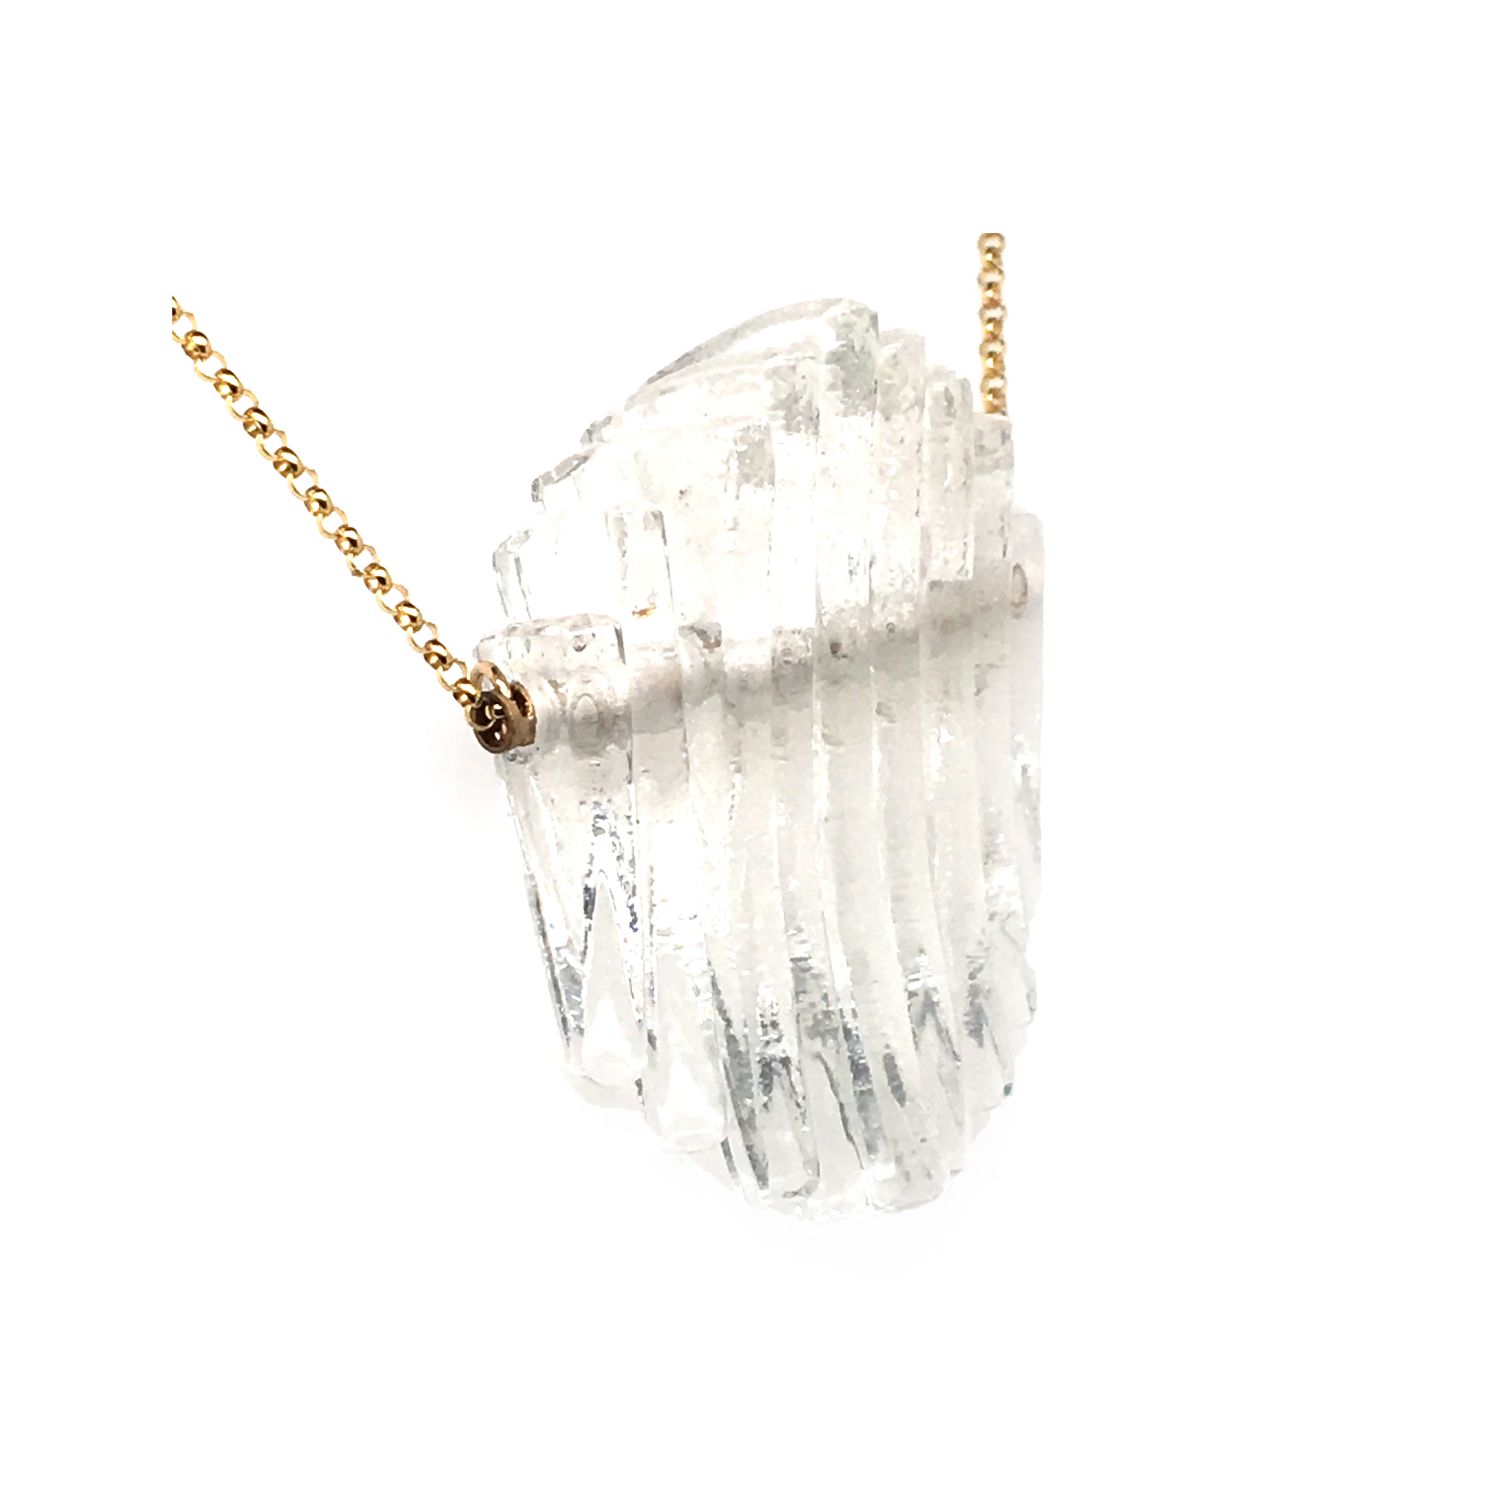 Broken Plates: Clear Kinetic Mini Ellipse Necklace Product Image 1 of 1